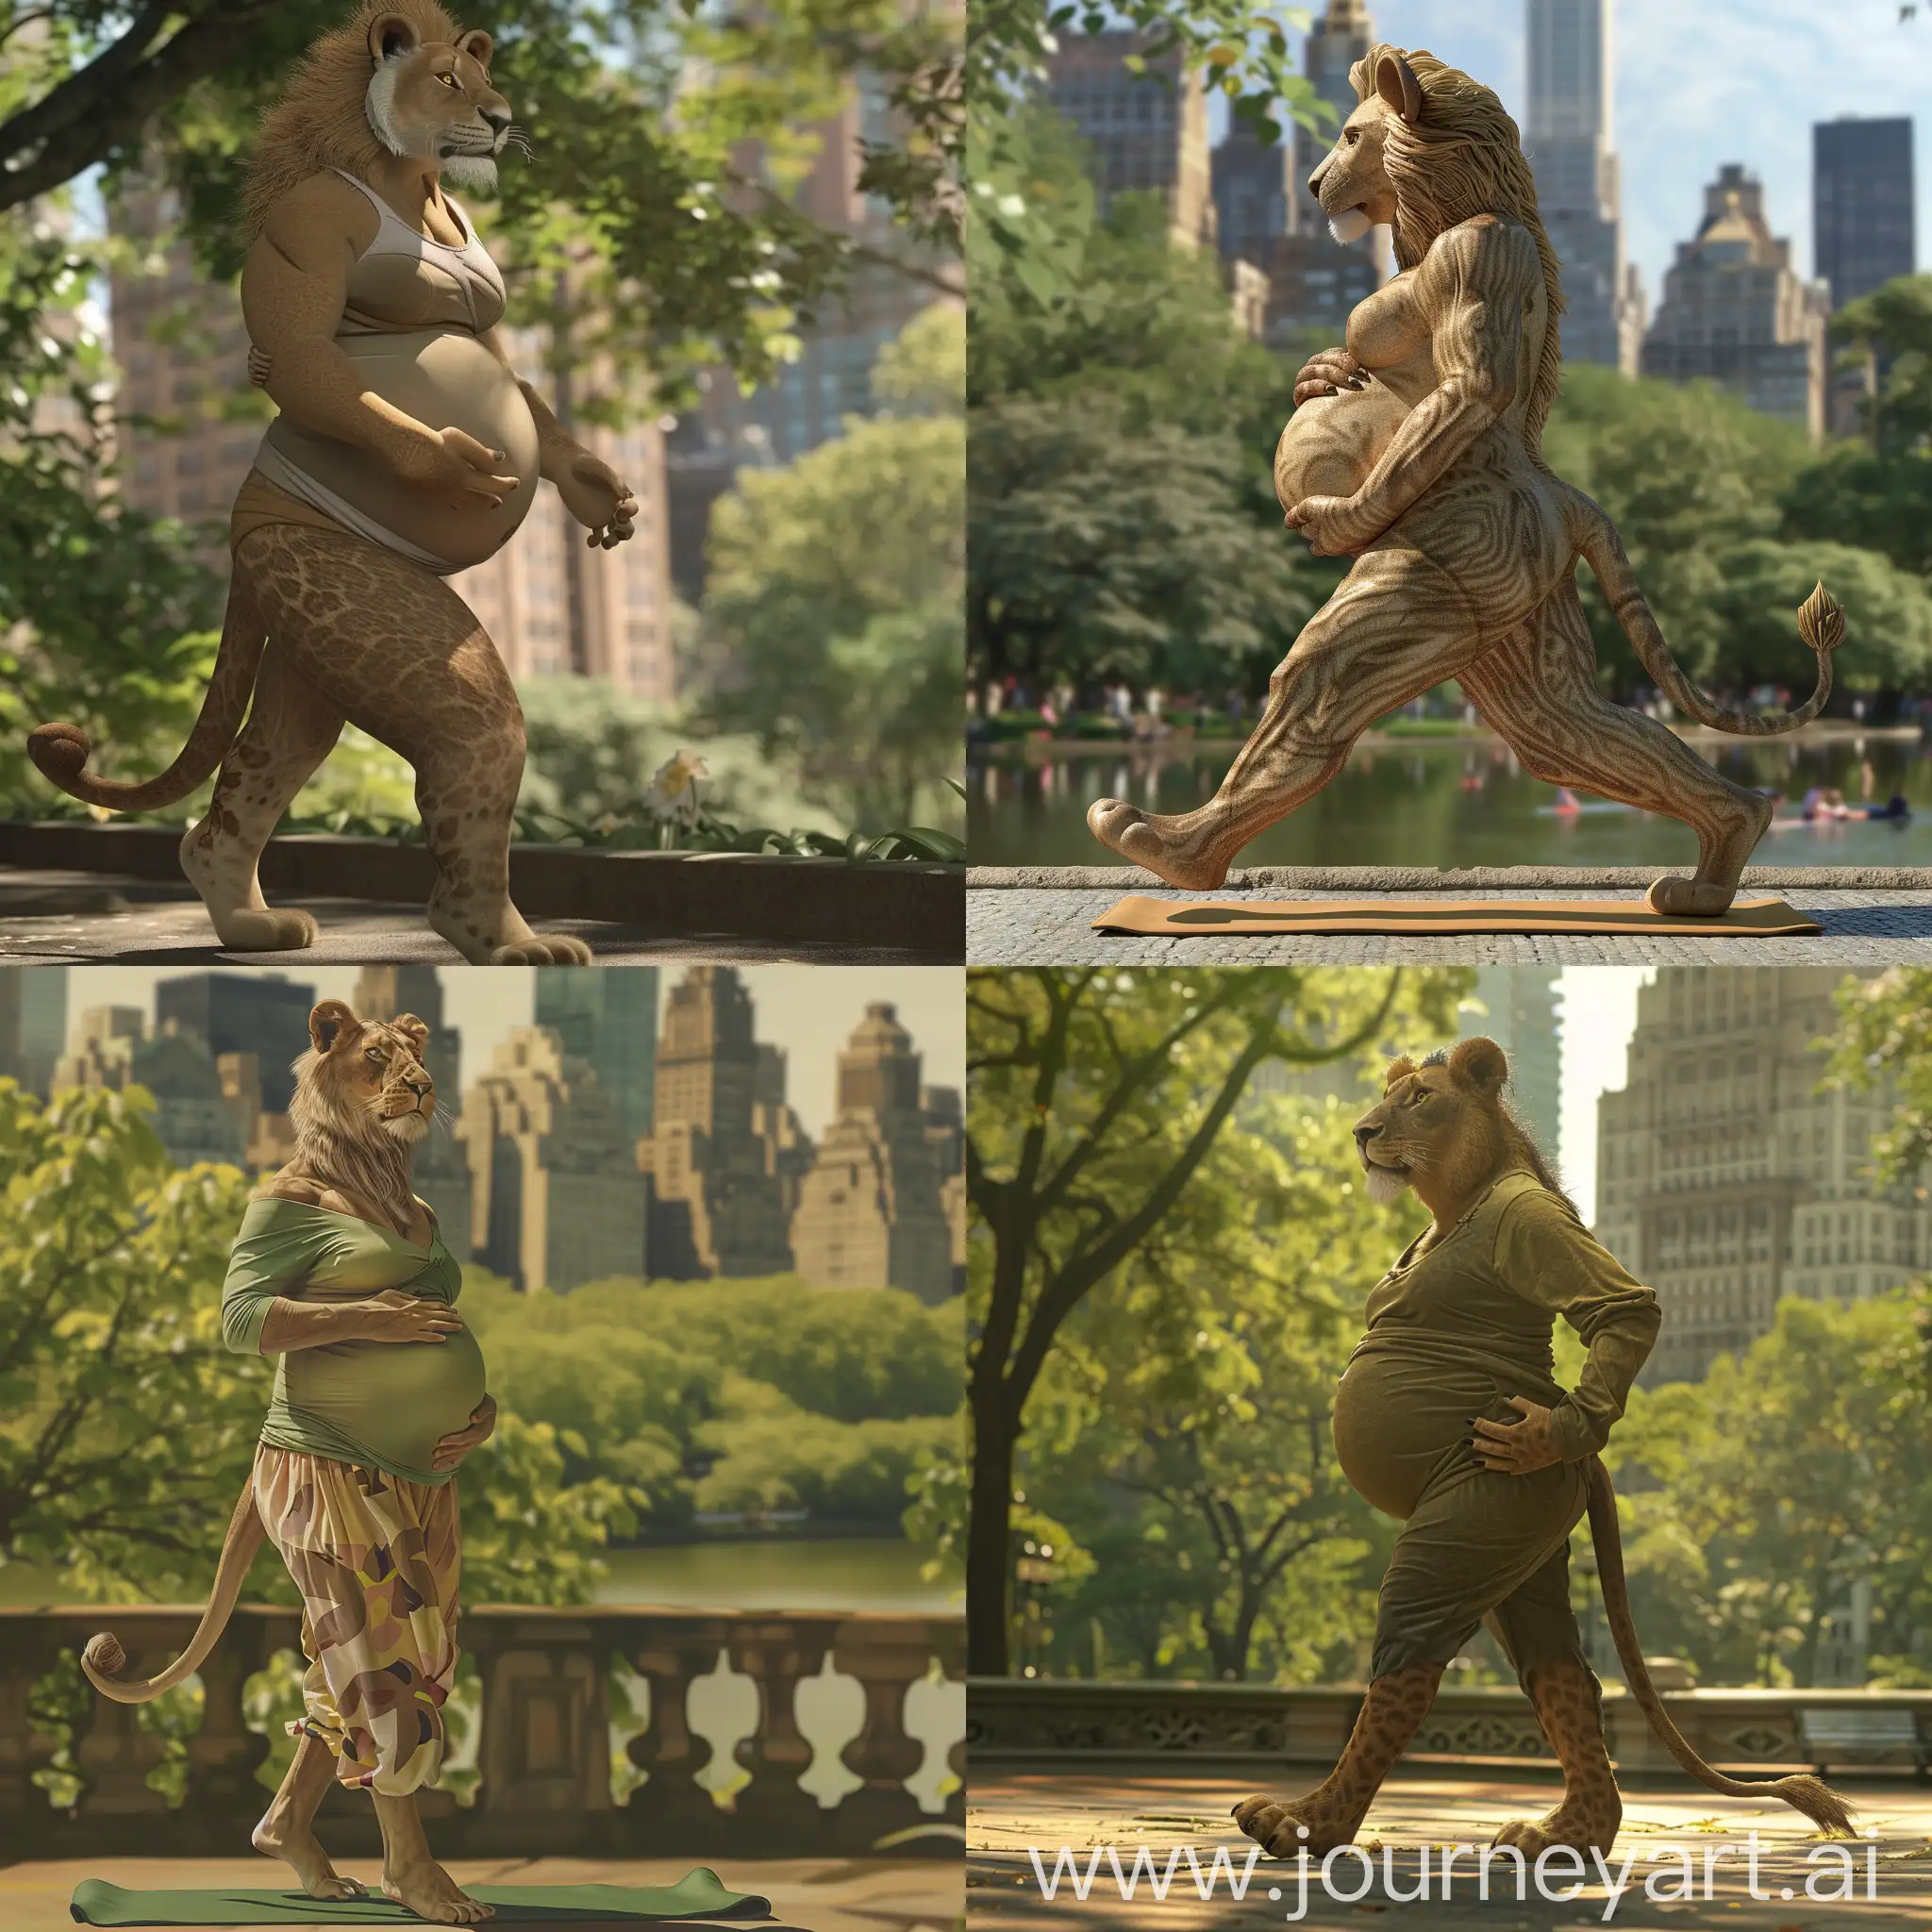 Pregnant-Lioness-Woman-Yoga-Walk-in-Central-Park